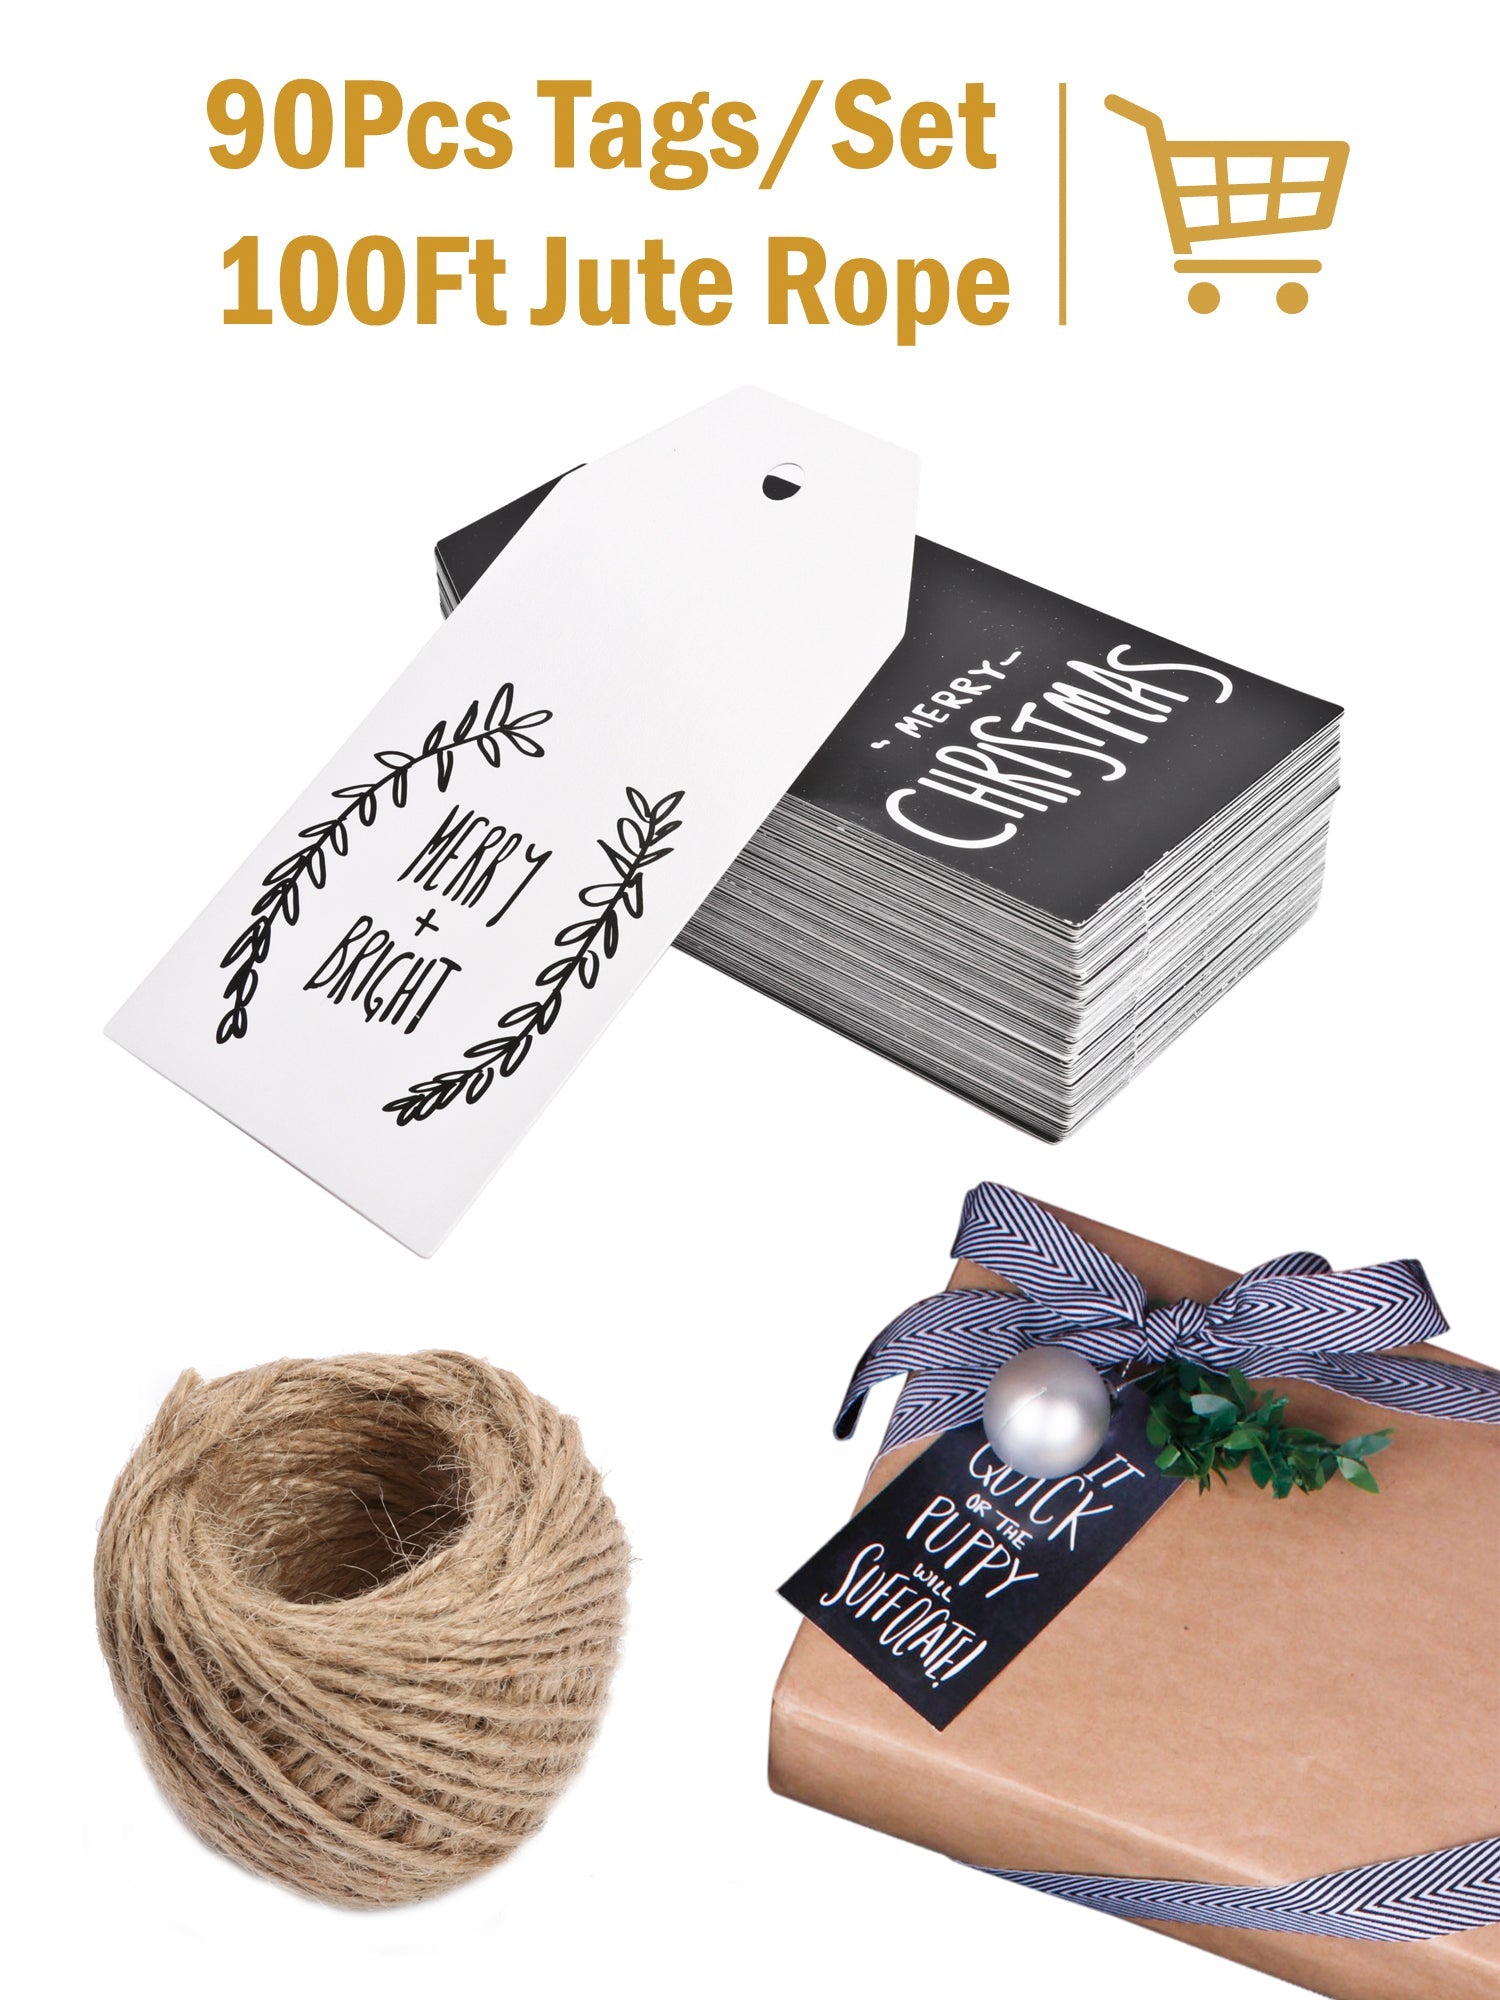 90Pcs Christmas Black Paper Gifts Tags with 100 Ft Natural Jute Twine